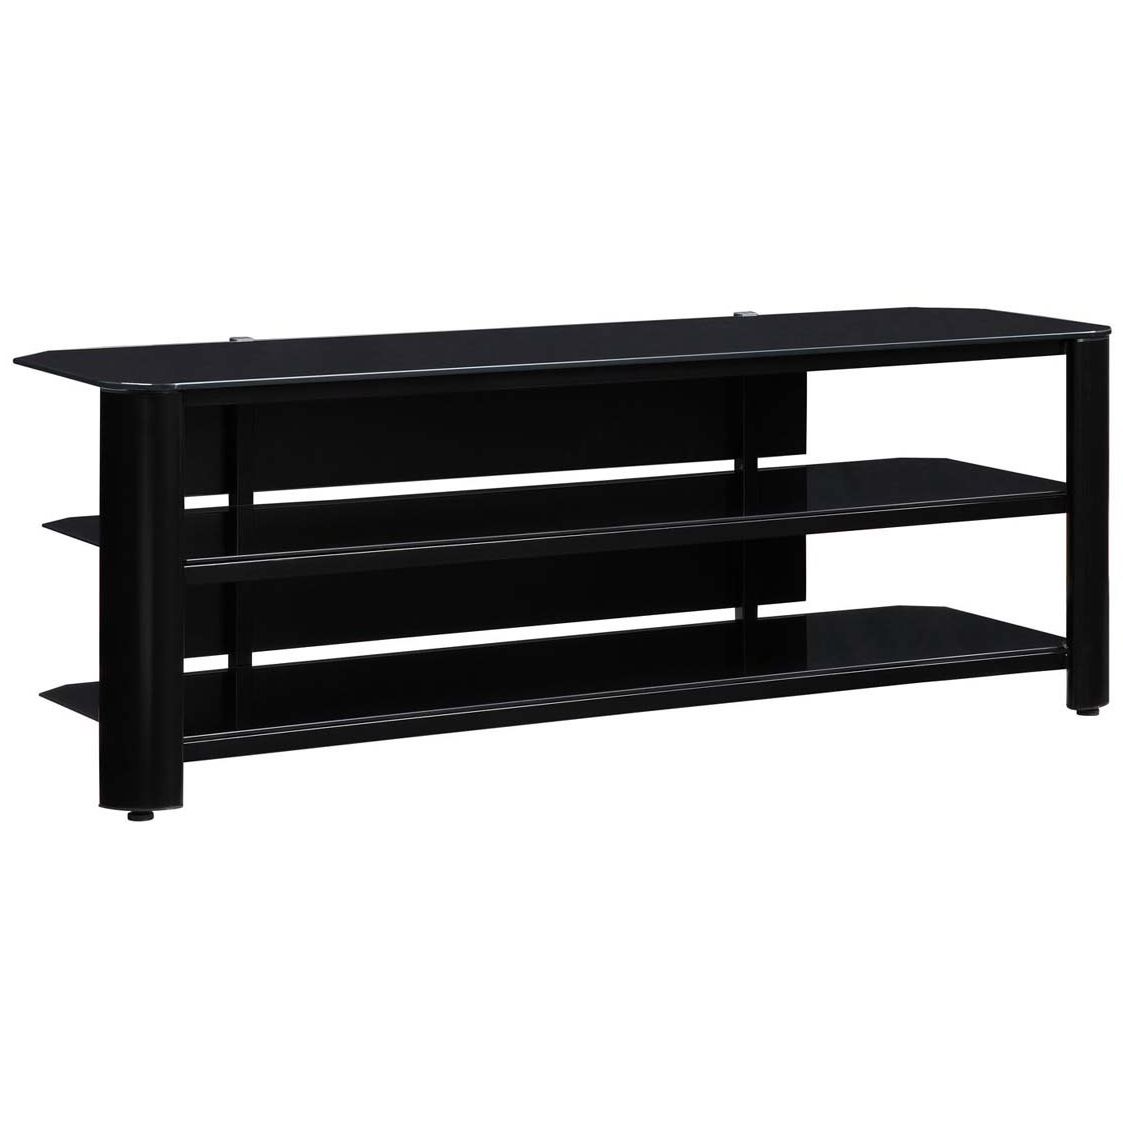 Shop Fold 'n' Snap Oxford Ez Black Innovex Tv Stand – Free Shipping Intended For Oxford 84 Inch Tv Stands (View 4 of 20)